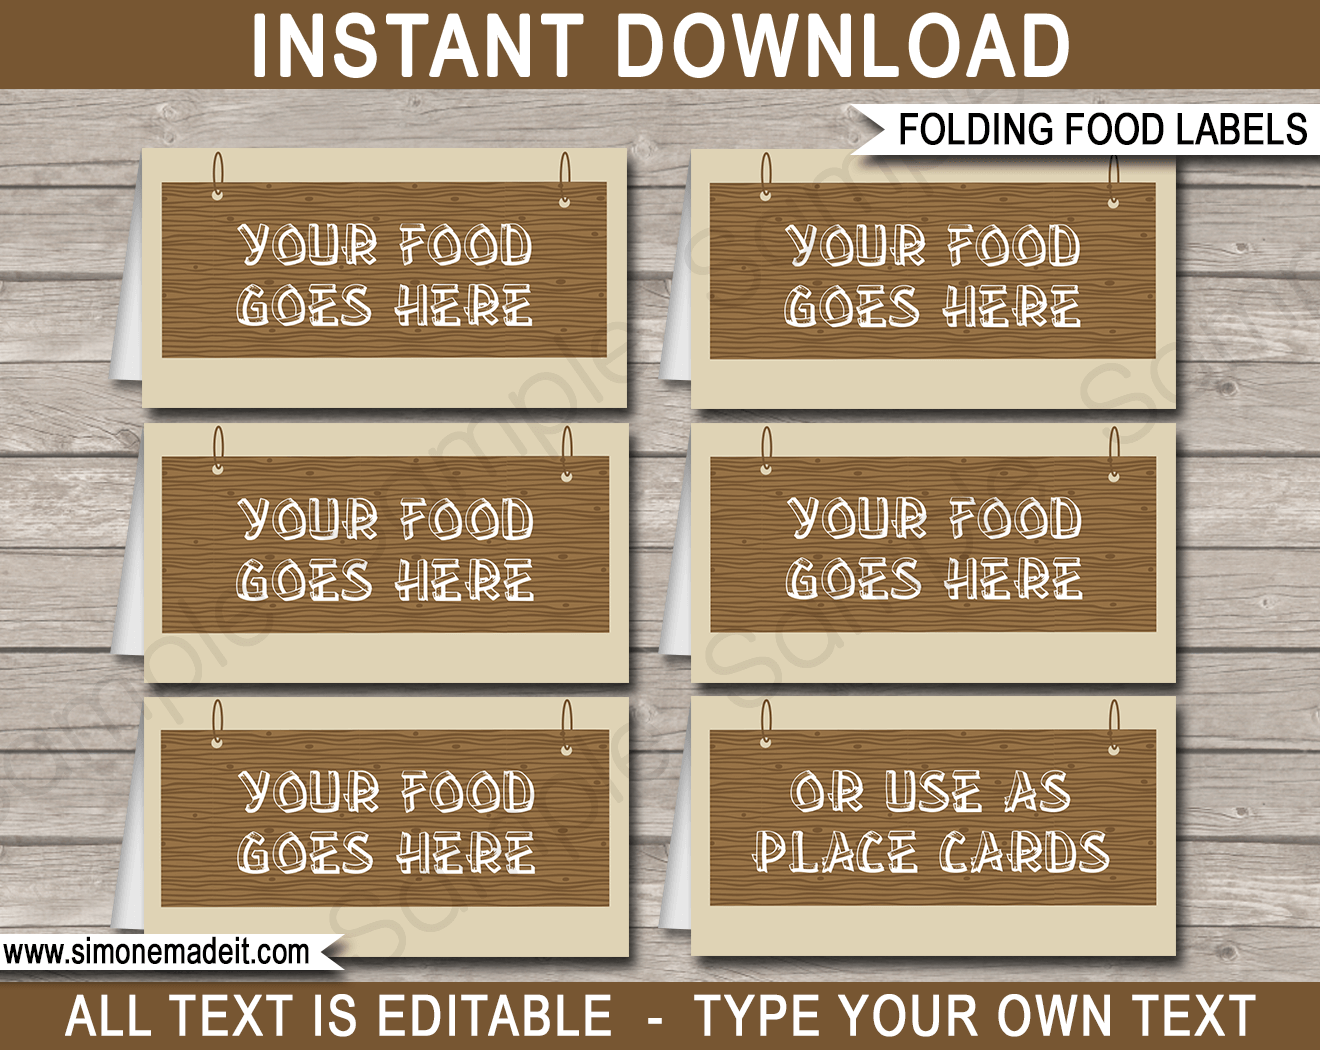 Camping Party Food Labels | Food Buffet Cards | Place Cards | Printable Party Decorations | DIY Editable template | $3.00 Instant Download via simonemadeit.com